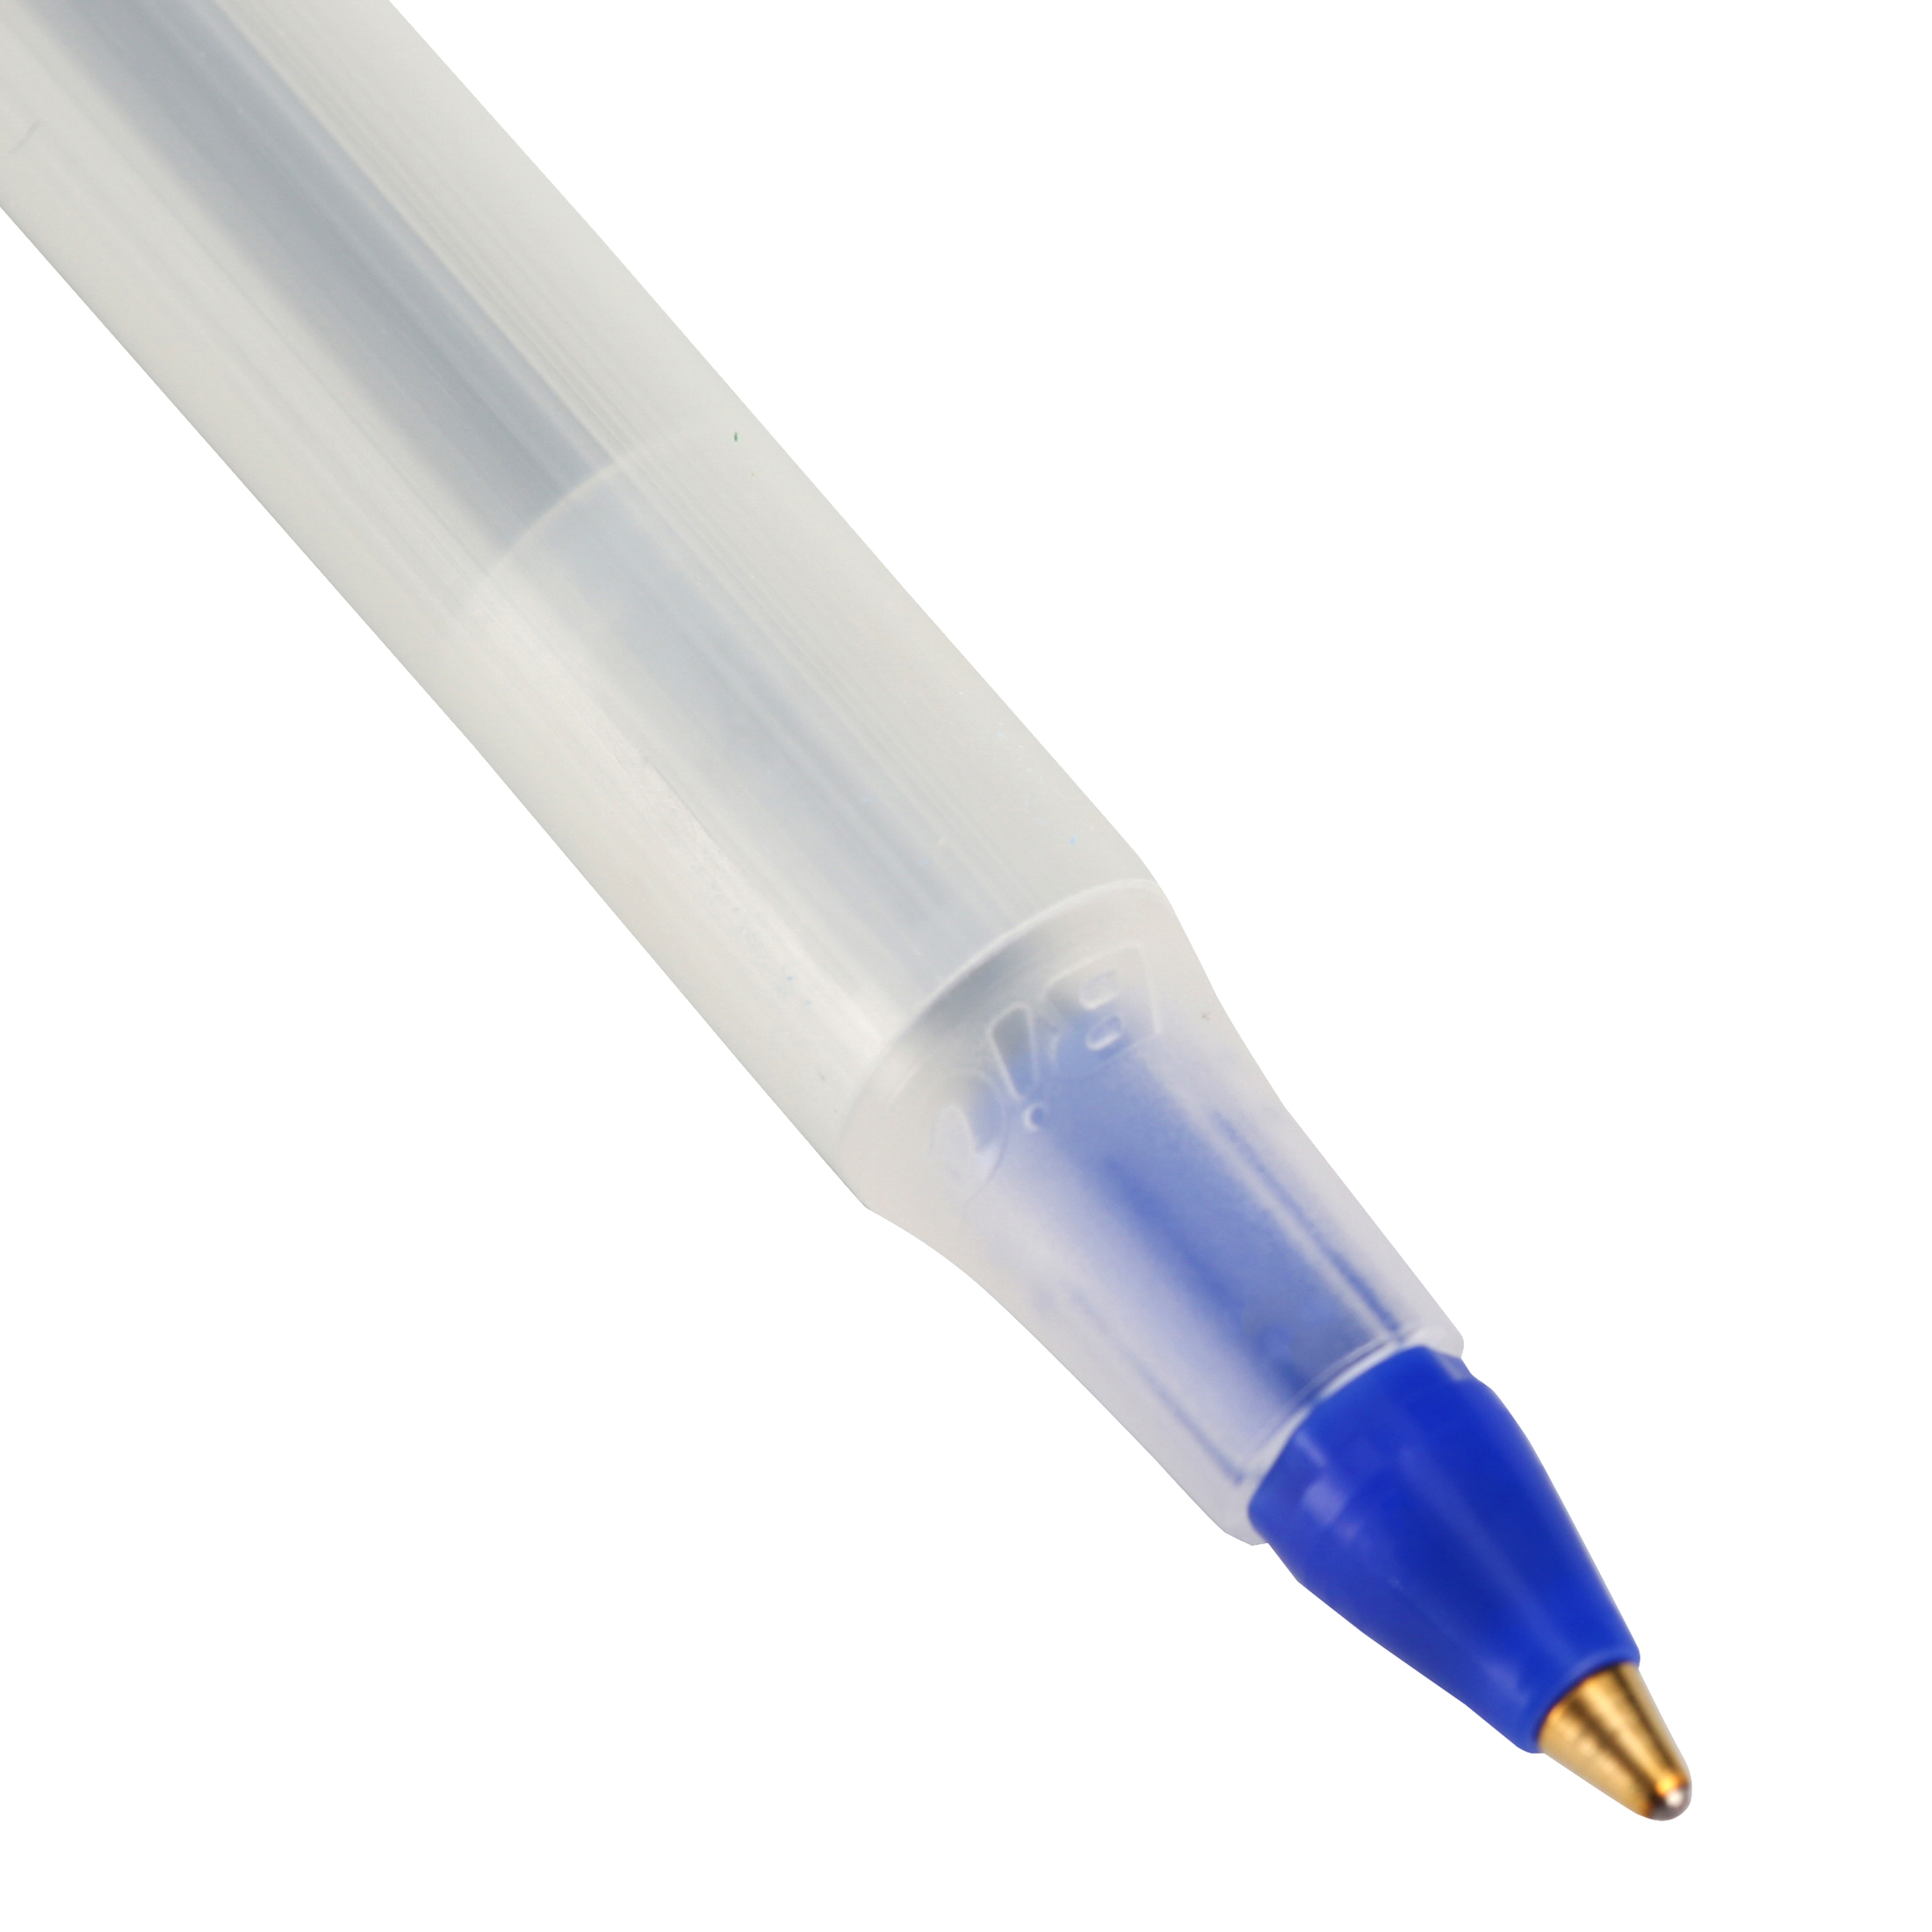 BIC Ecolutions Round Stic Ball Pen, Medium Point, Blue, 50-Count - image 4 of 8